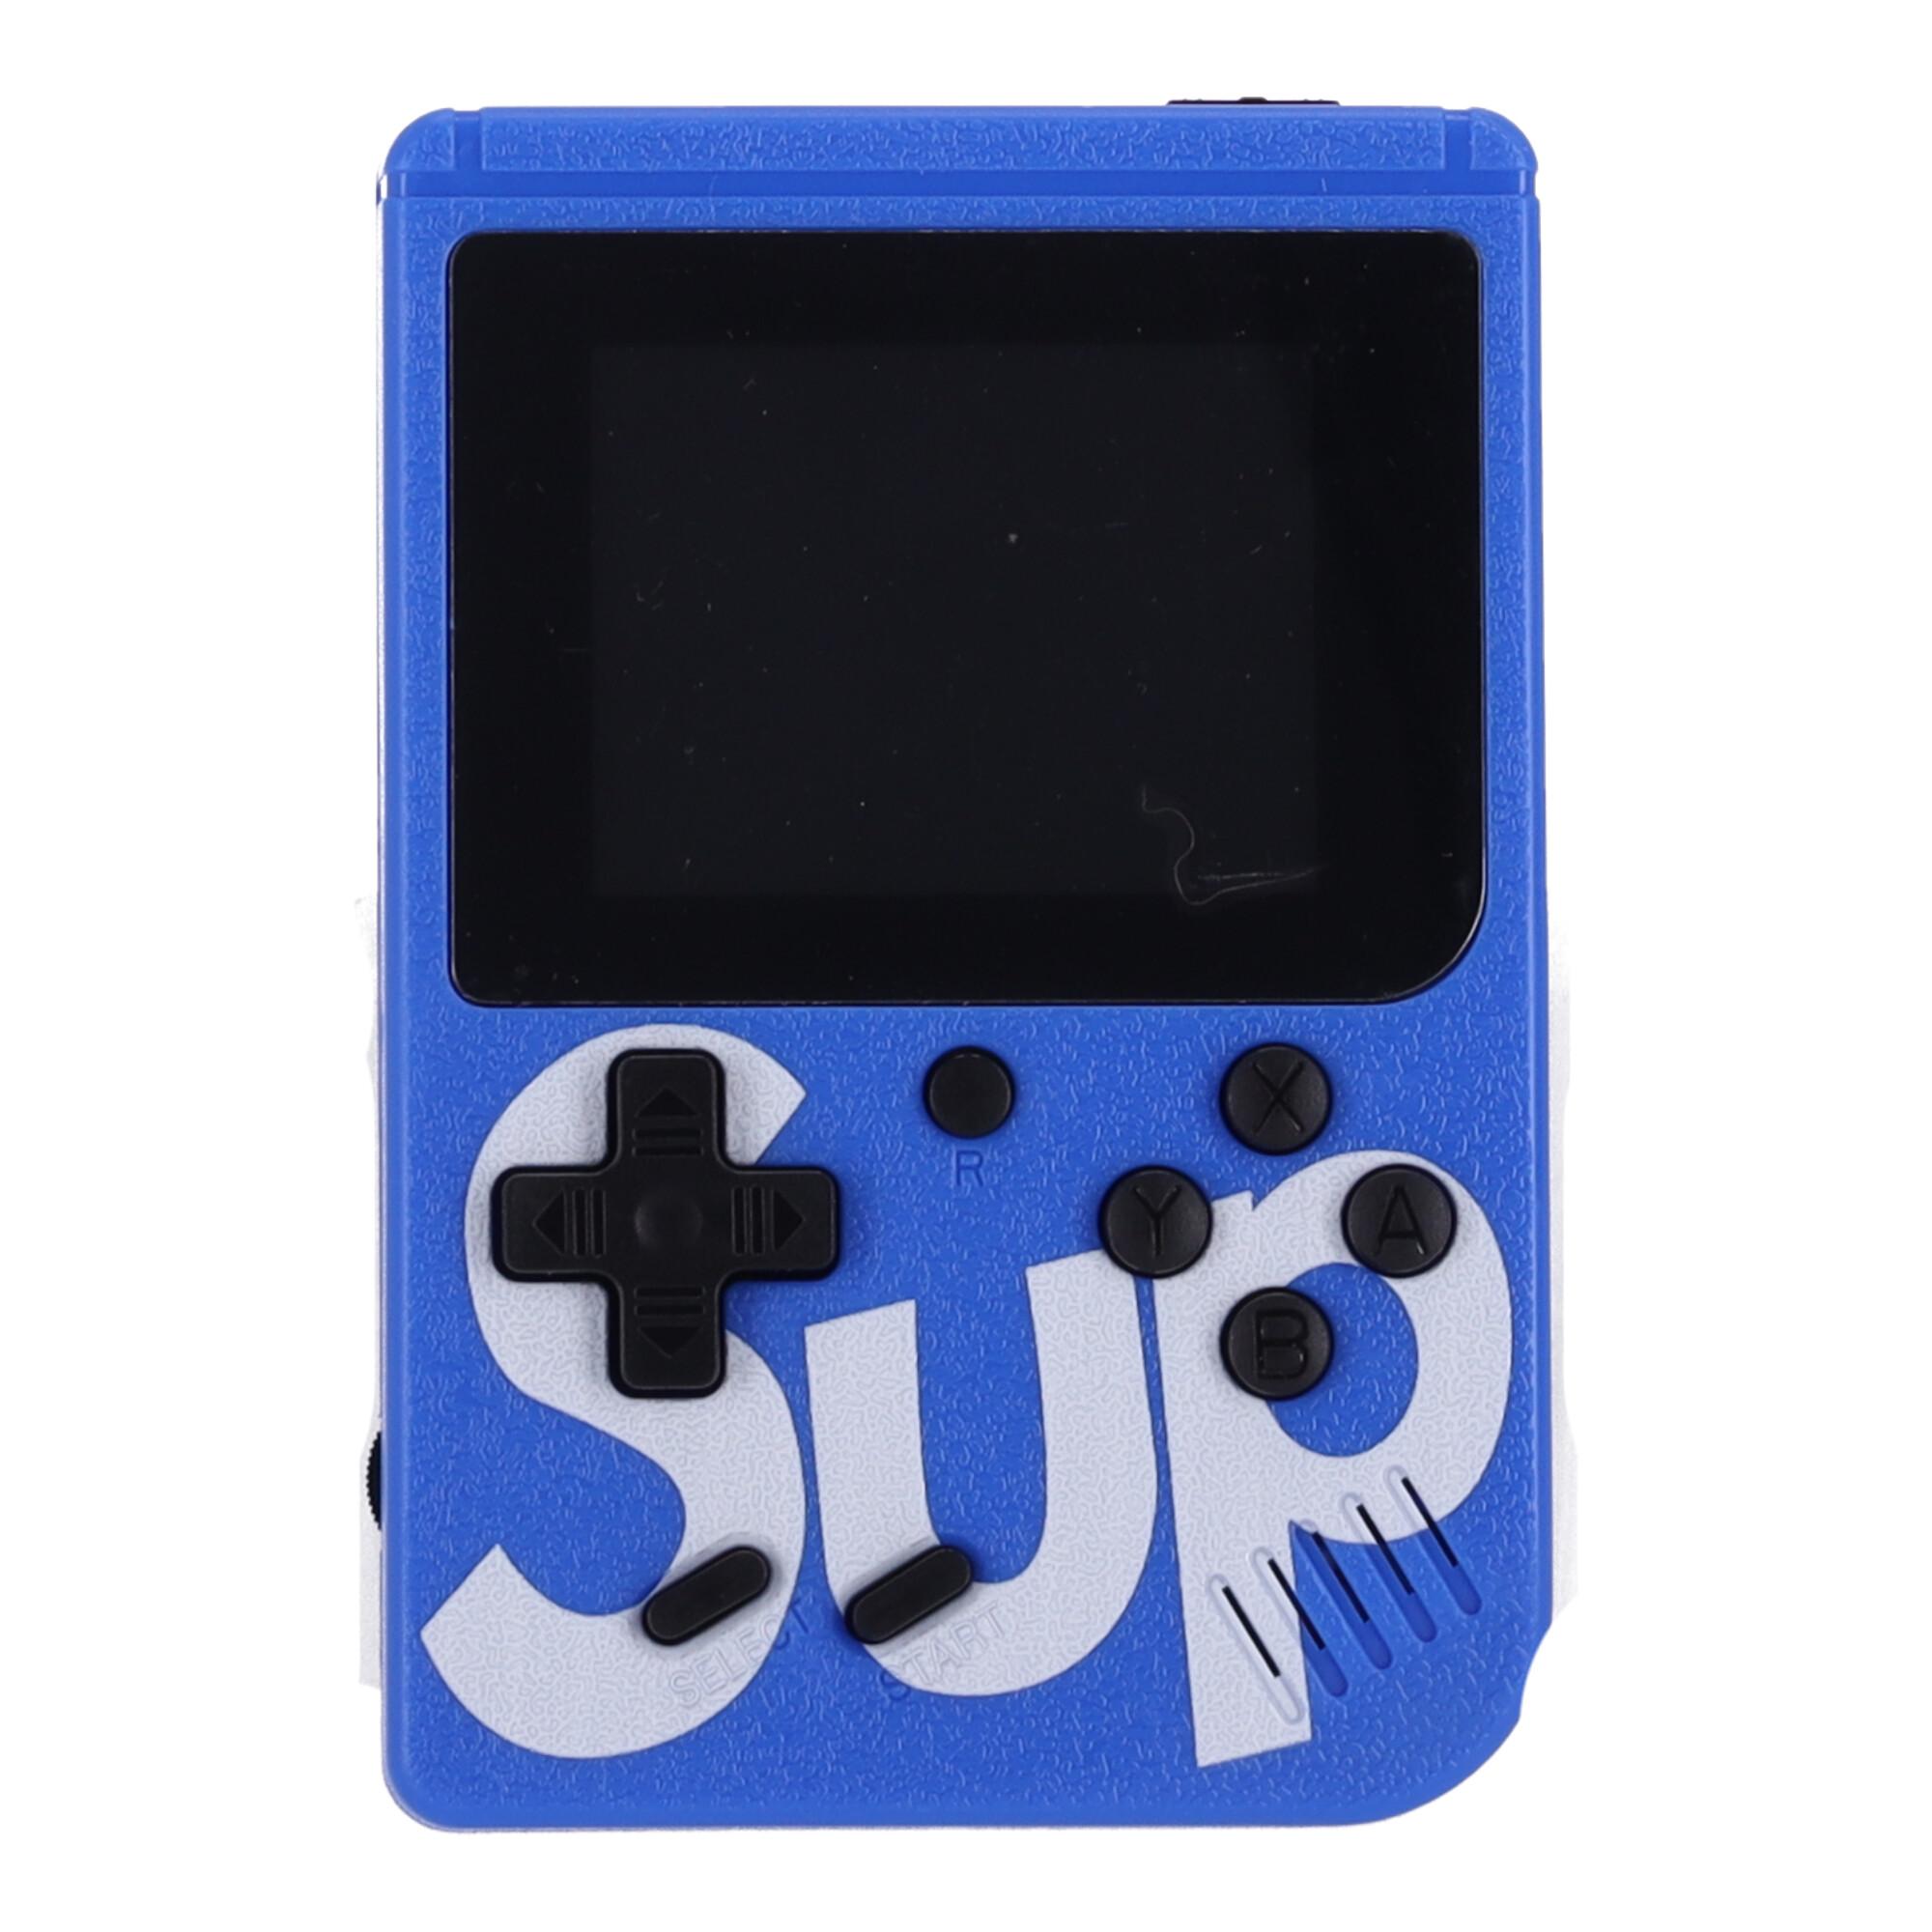 Mini handheld consoleSUP 400 games - blue (for one player)